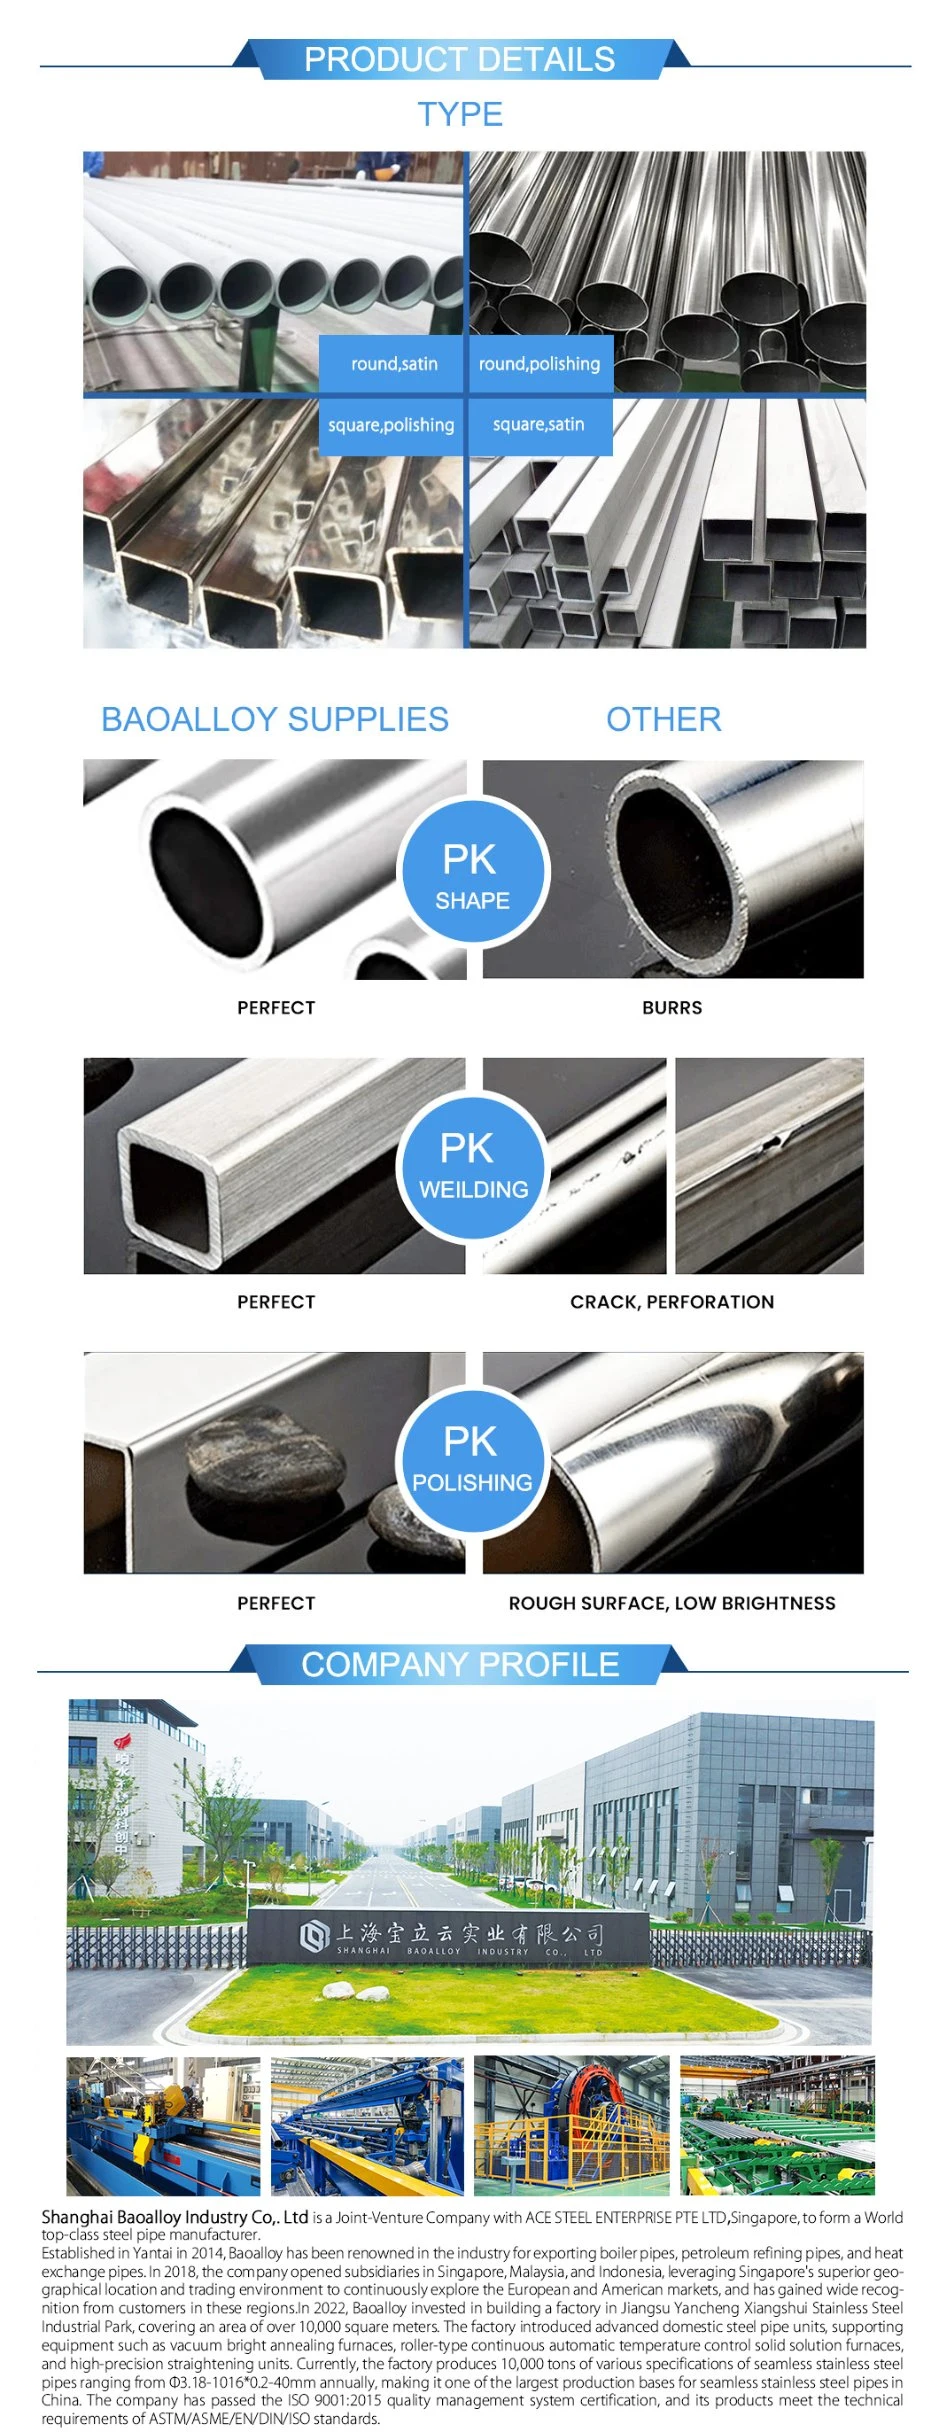 Stainless Steel Pipe/Tube S30400 Pipe Stainless Steel Seamless Pipe/Weld Pipe/Tube, S30400 Pipe